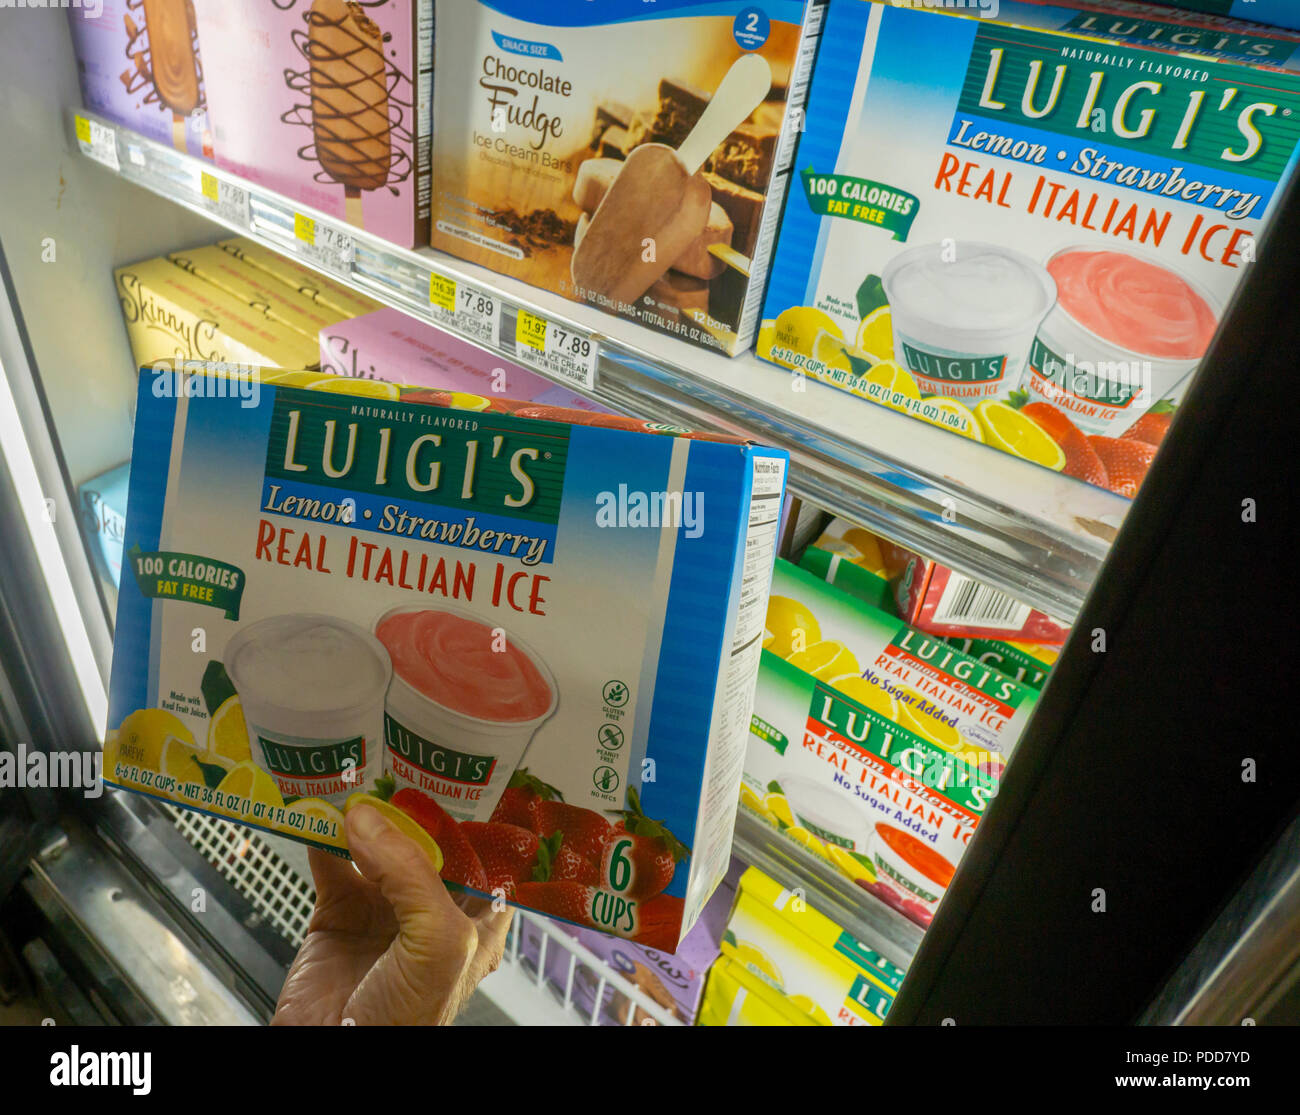 A shopper in a supermarket in New York chooses a package of Luigi's Italian Ices, a brand of J&J Snack Foods on Monday, July 30, 2018. J&J Snack Foods recently reported fiscal third-quarter profits that beat analysts' expectations. The company has reported net sales that increased every quarter for 46 years.  (Â© Richard B. Levine) Stock Photo